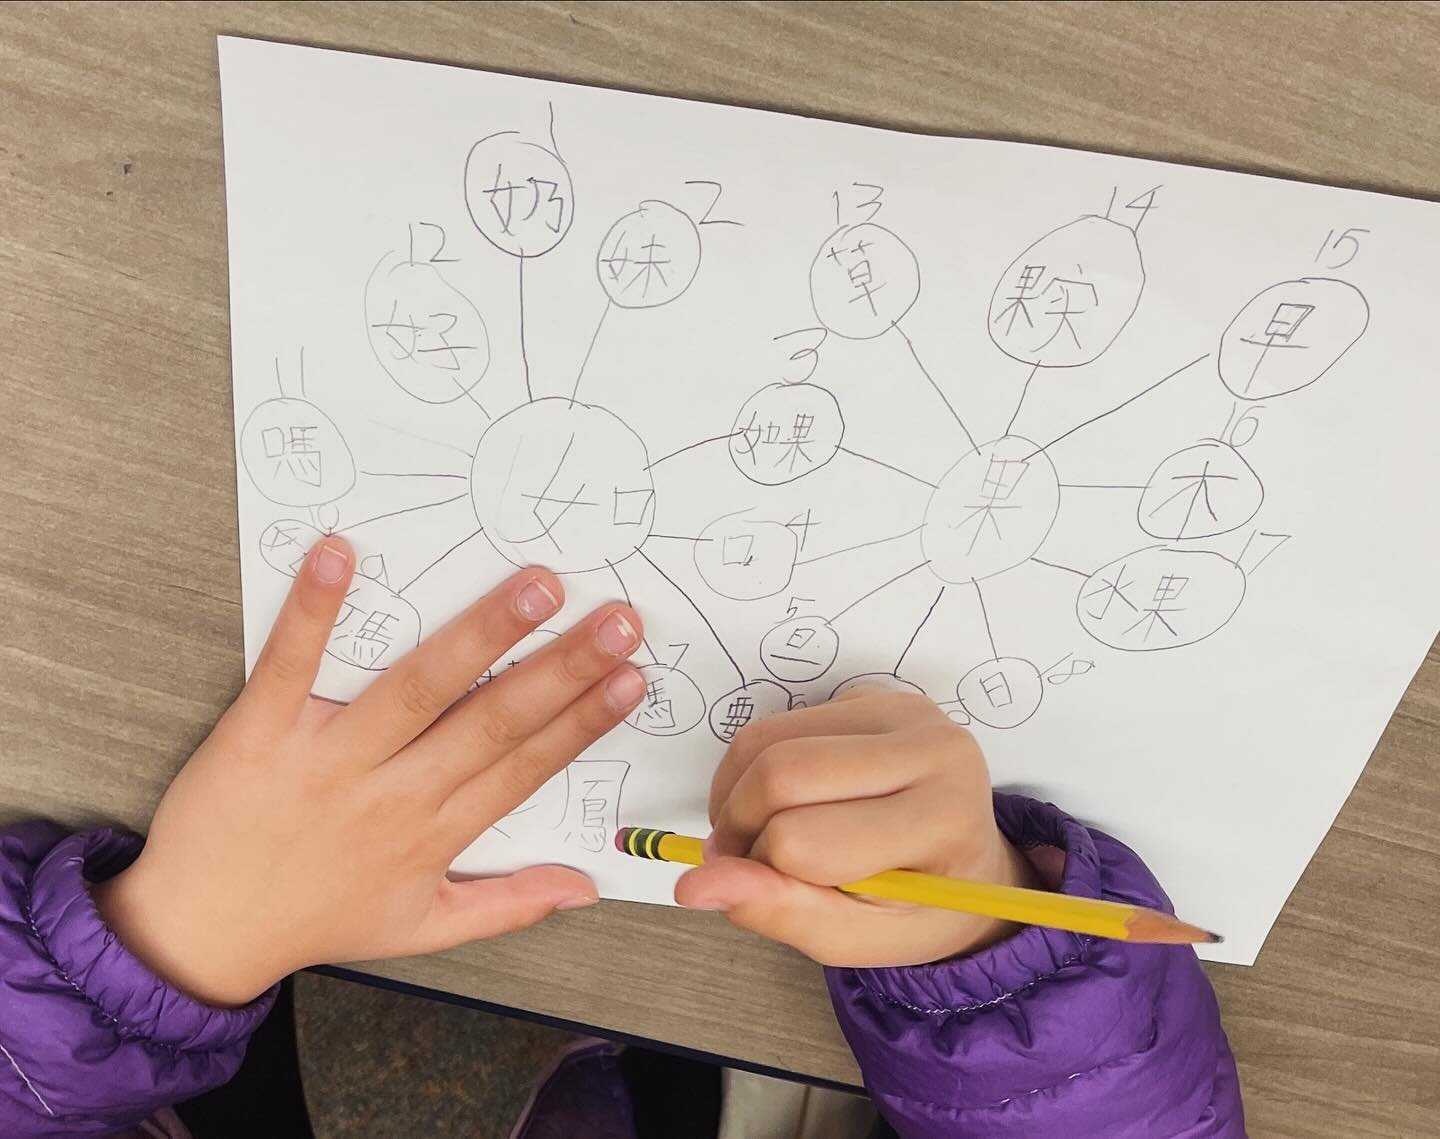 Check out more double bubble map Chinese writing examples! 📝

Today, my first graders picked &ldquo;如果&rdquo; to be the word of the day. They created double bubble map on their sheet and come up with characters with the same radicals or word parts. 